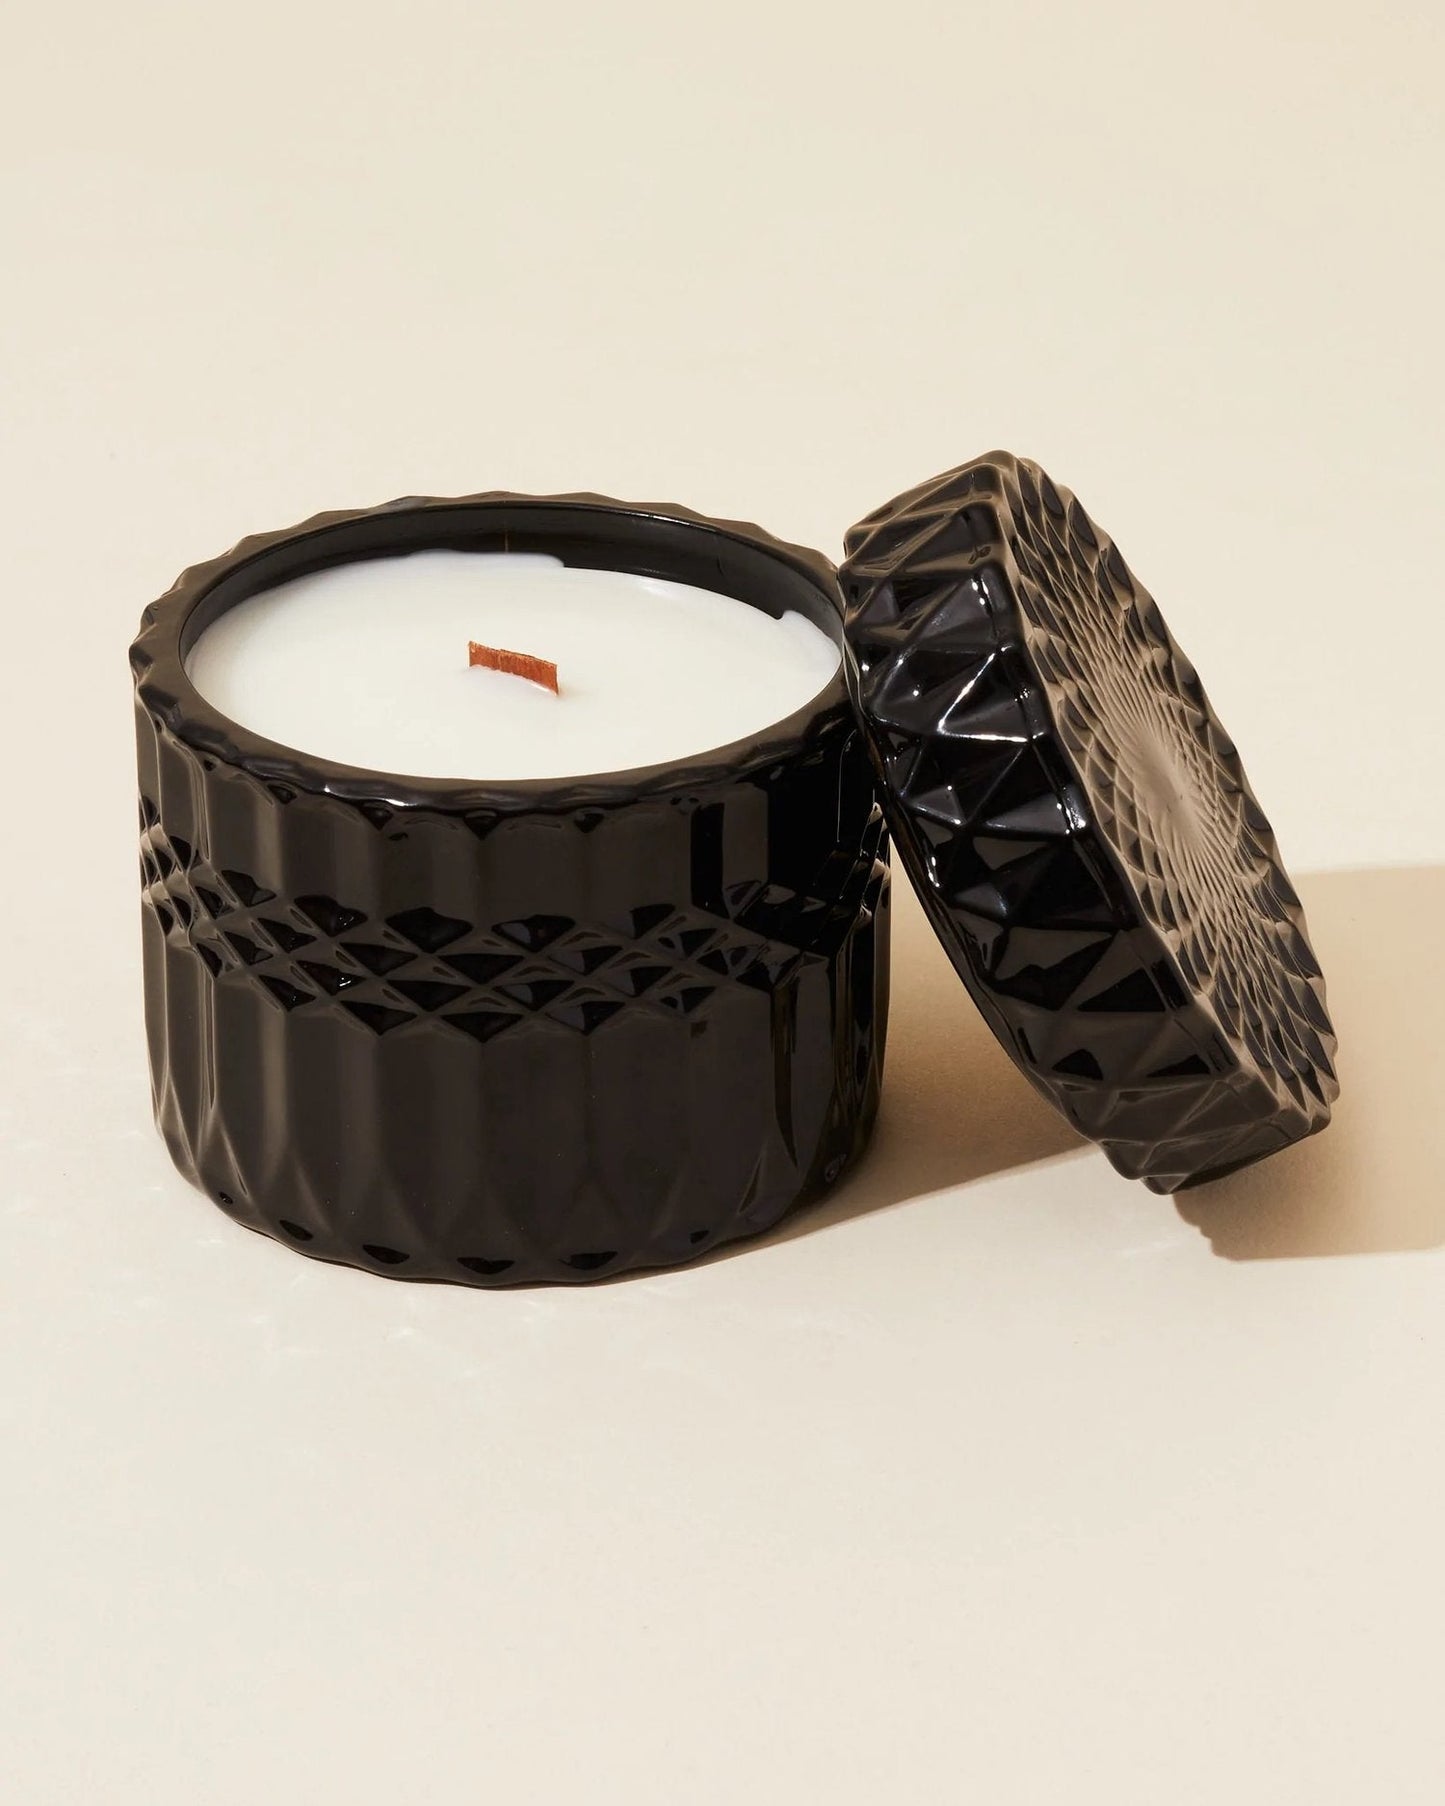 Vintage Inspired Candles - The Dragonfly Boutique